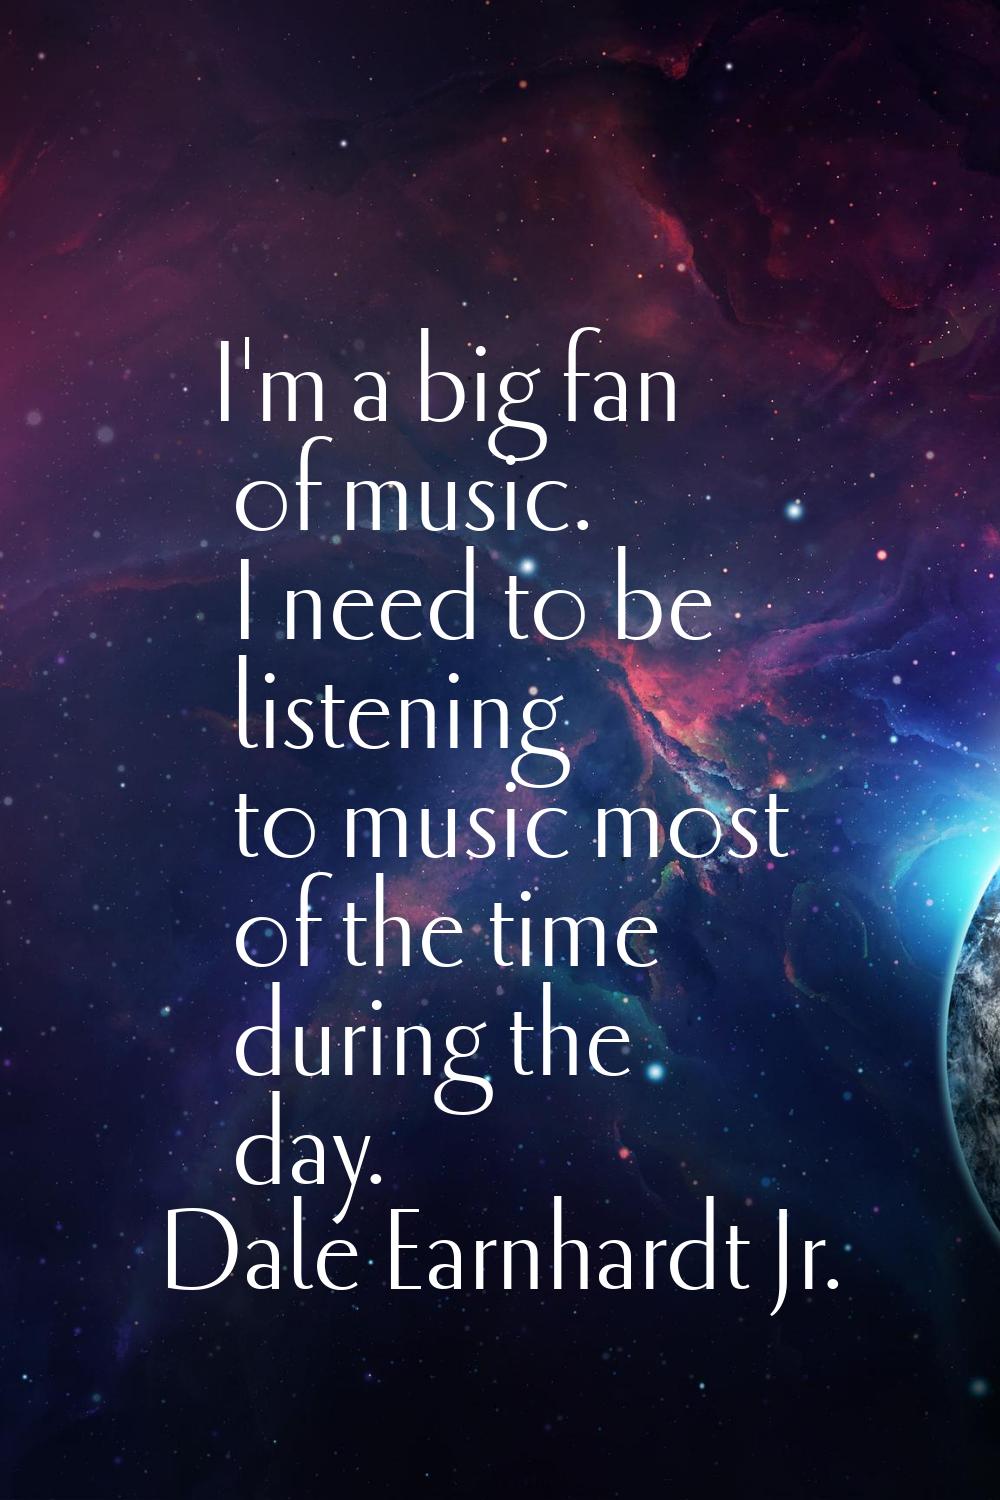 I'm a big fan of music. I need to be listening to music most of the time during the day.